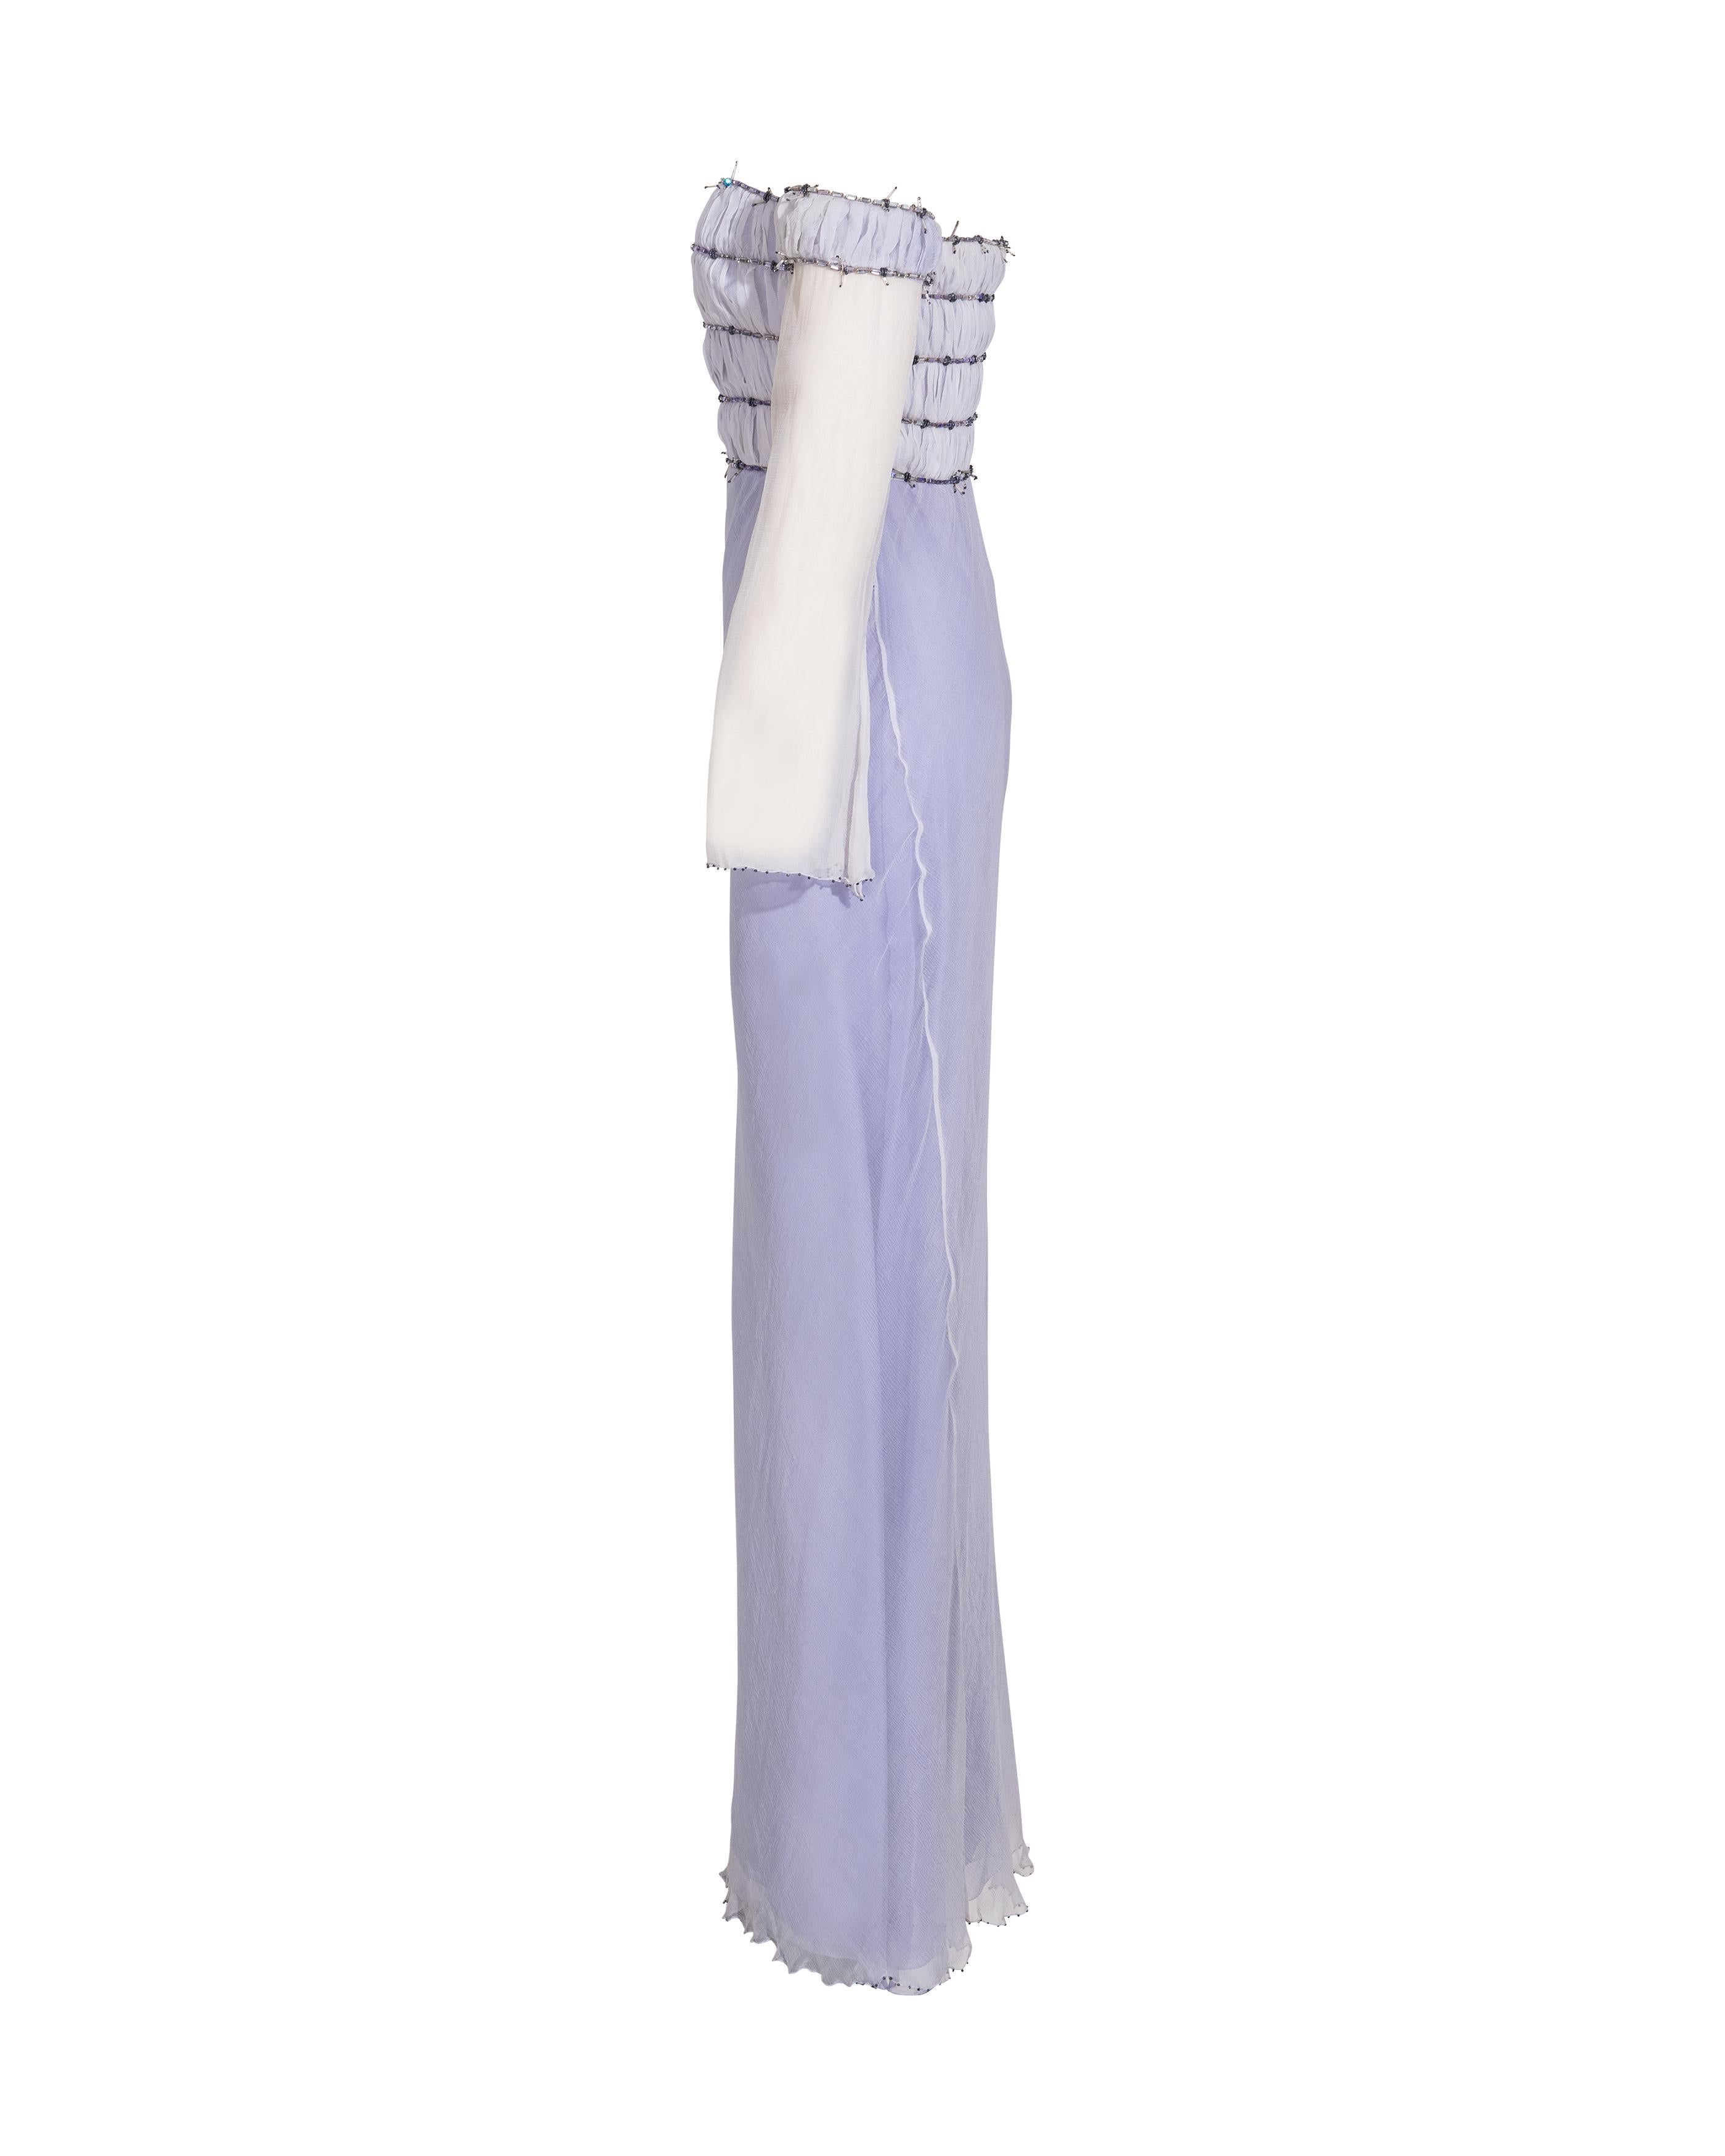 Women's A/W 1998 Gianni Versace Lilac Strapless One-Shoulder 'Barbed Wire' Gown